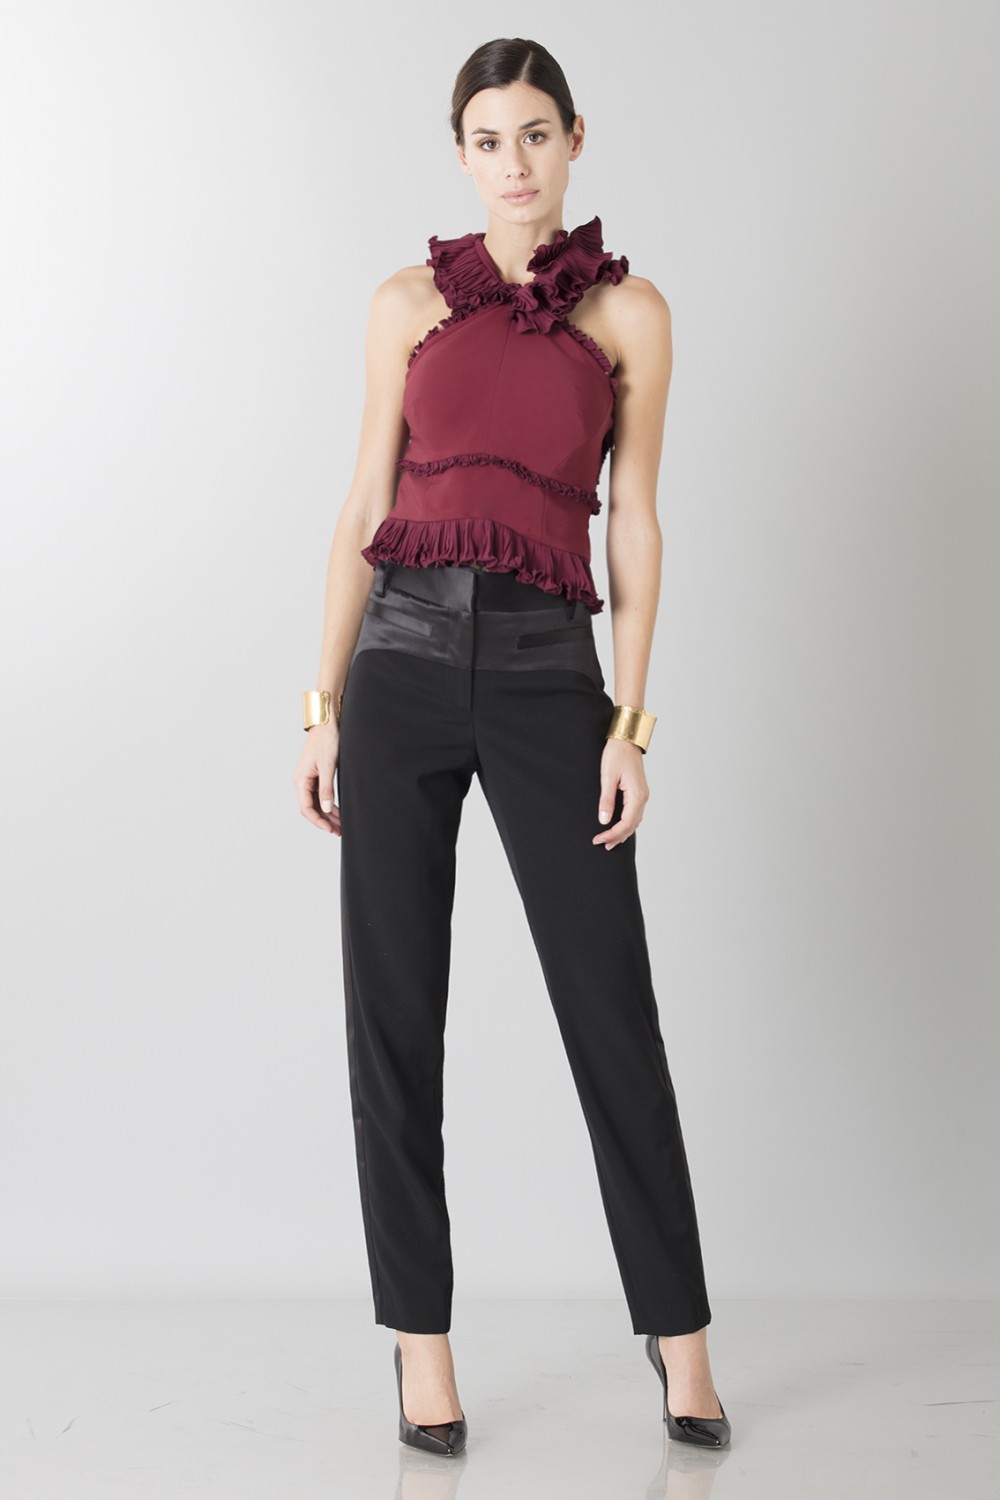 Bordeaux top with ruffles